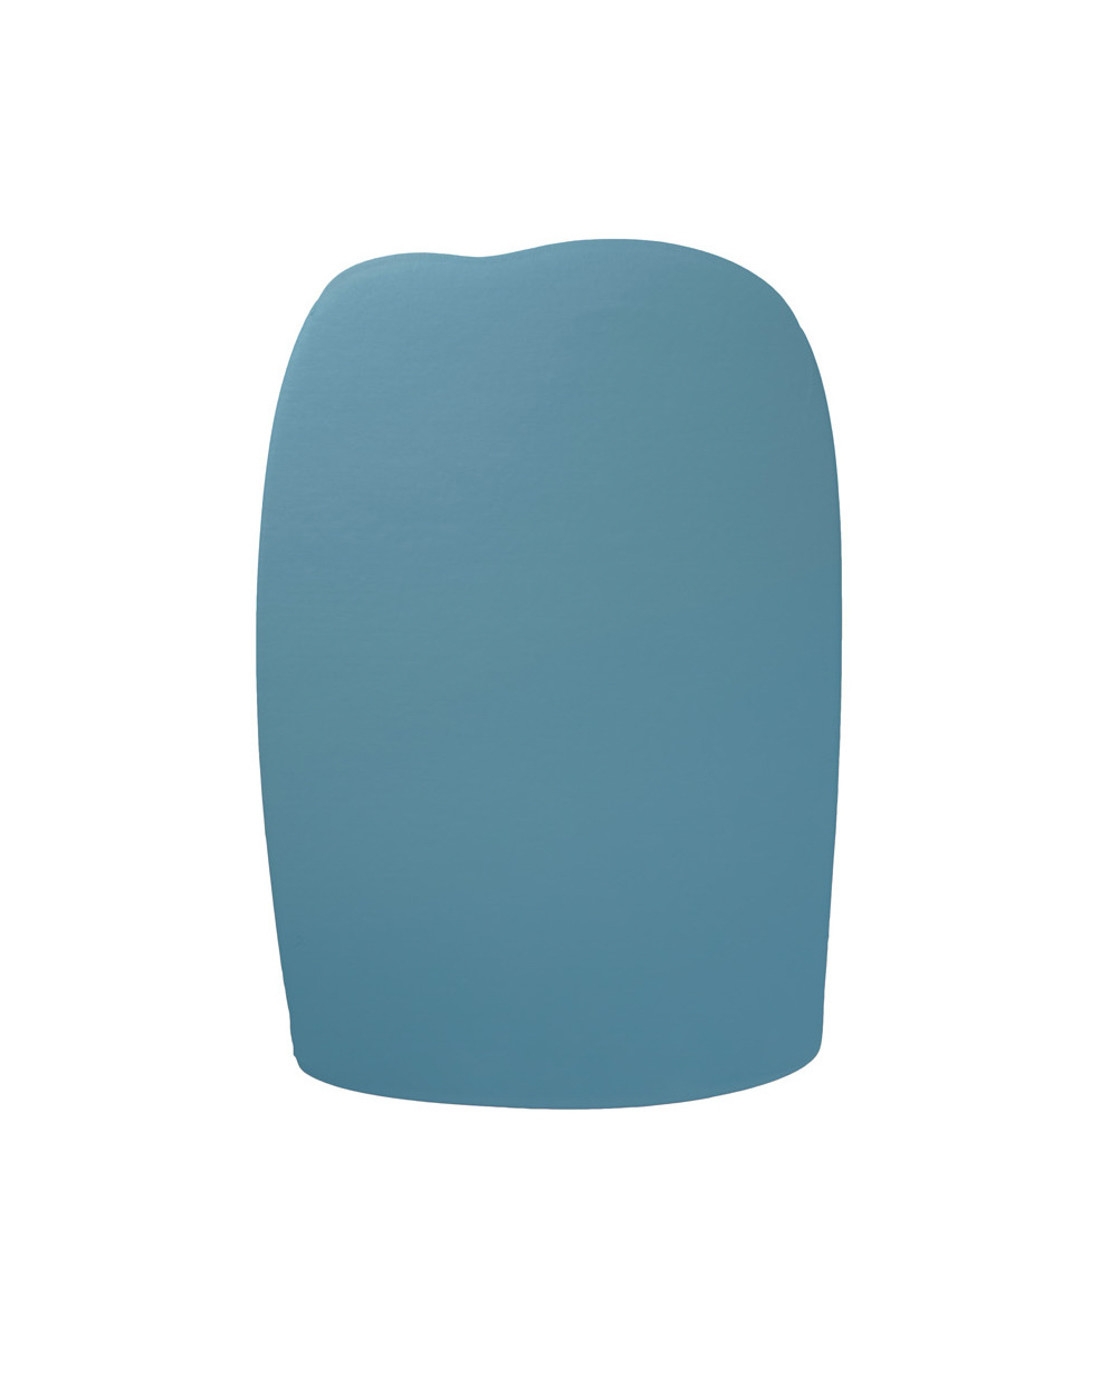 Clare Paint - Blue Ivy - Wall Swatch - Image 0